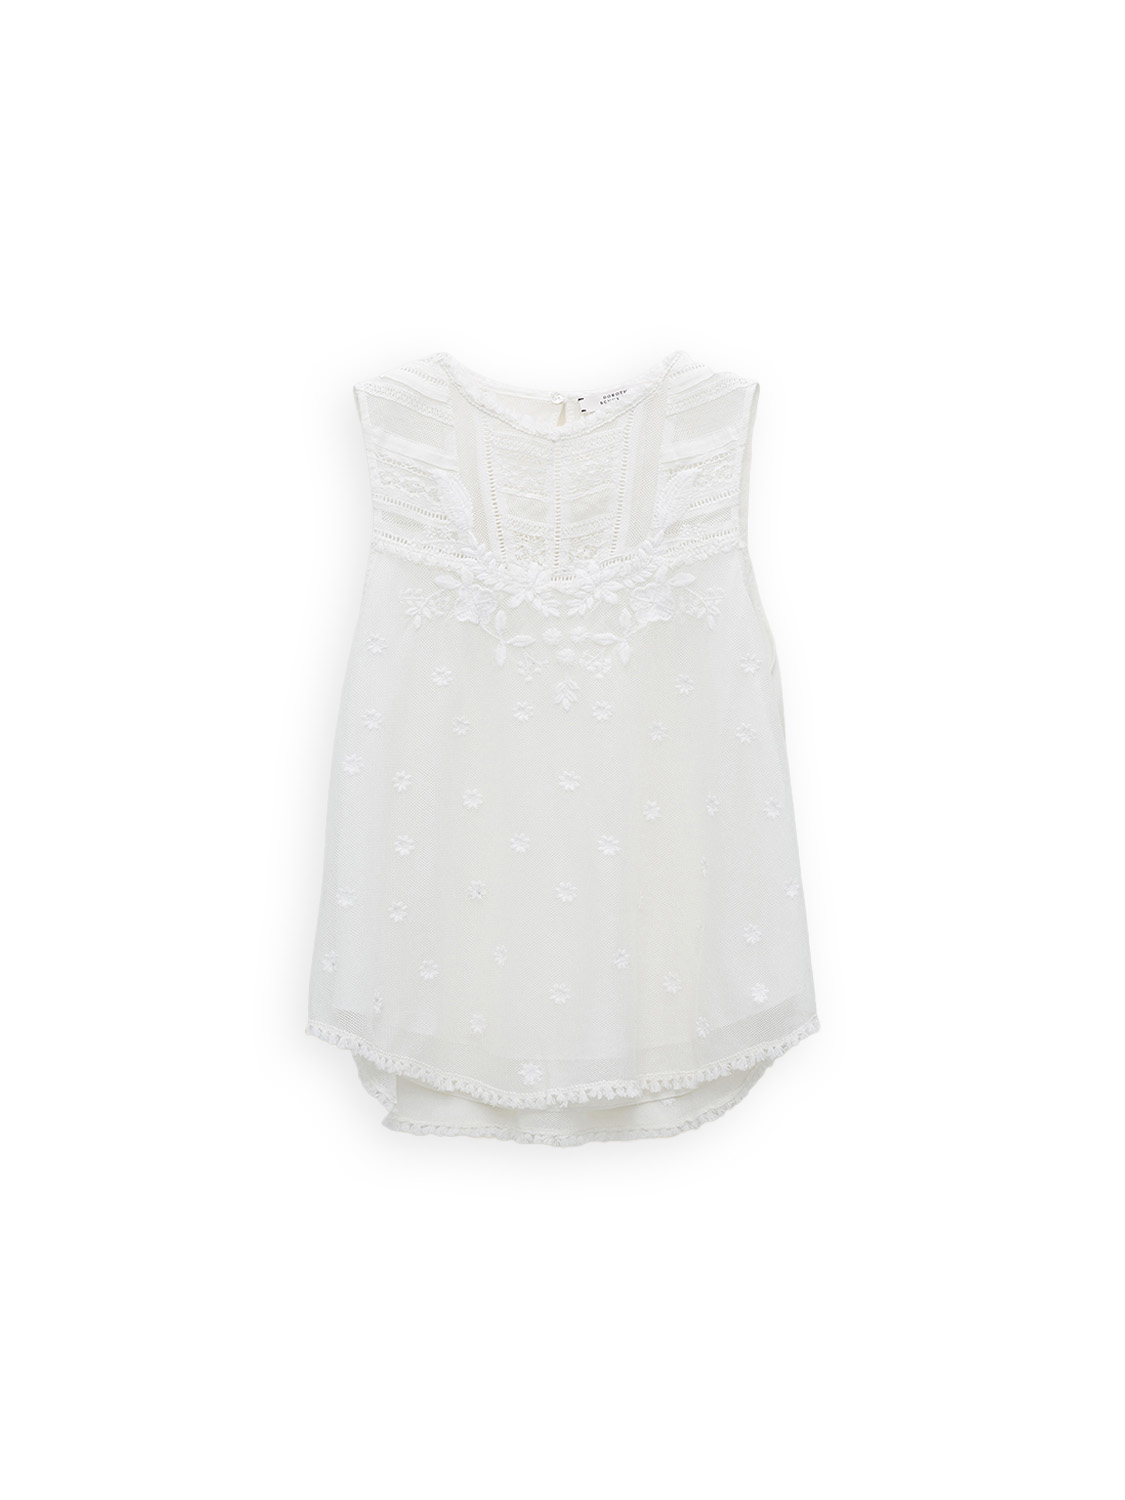 Dorothee Schumacher Stunning Dream – Blouse with lace  white S